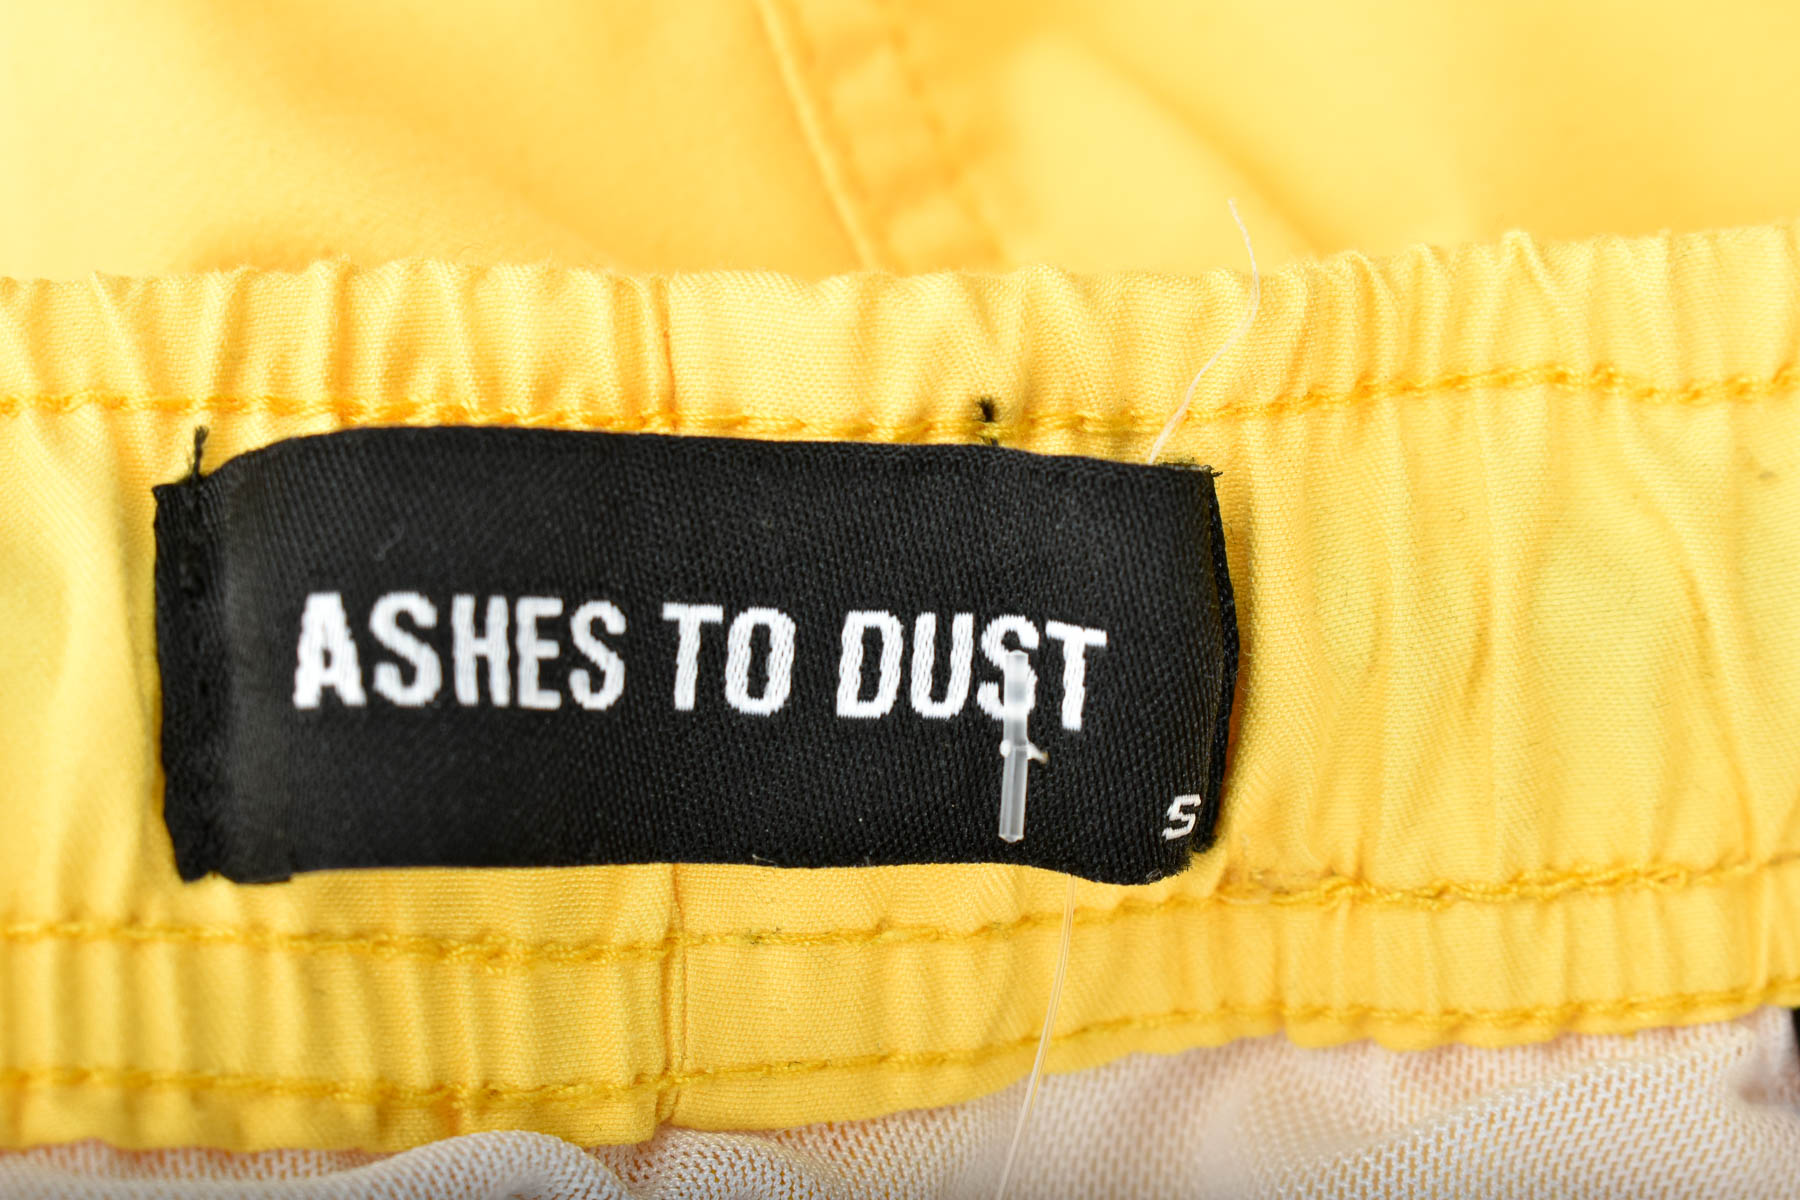 Men's shorts - Ashes to dust - 2